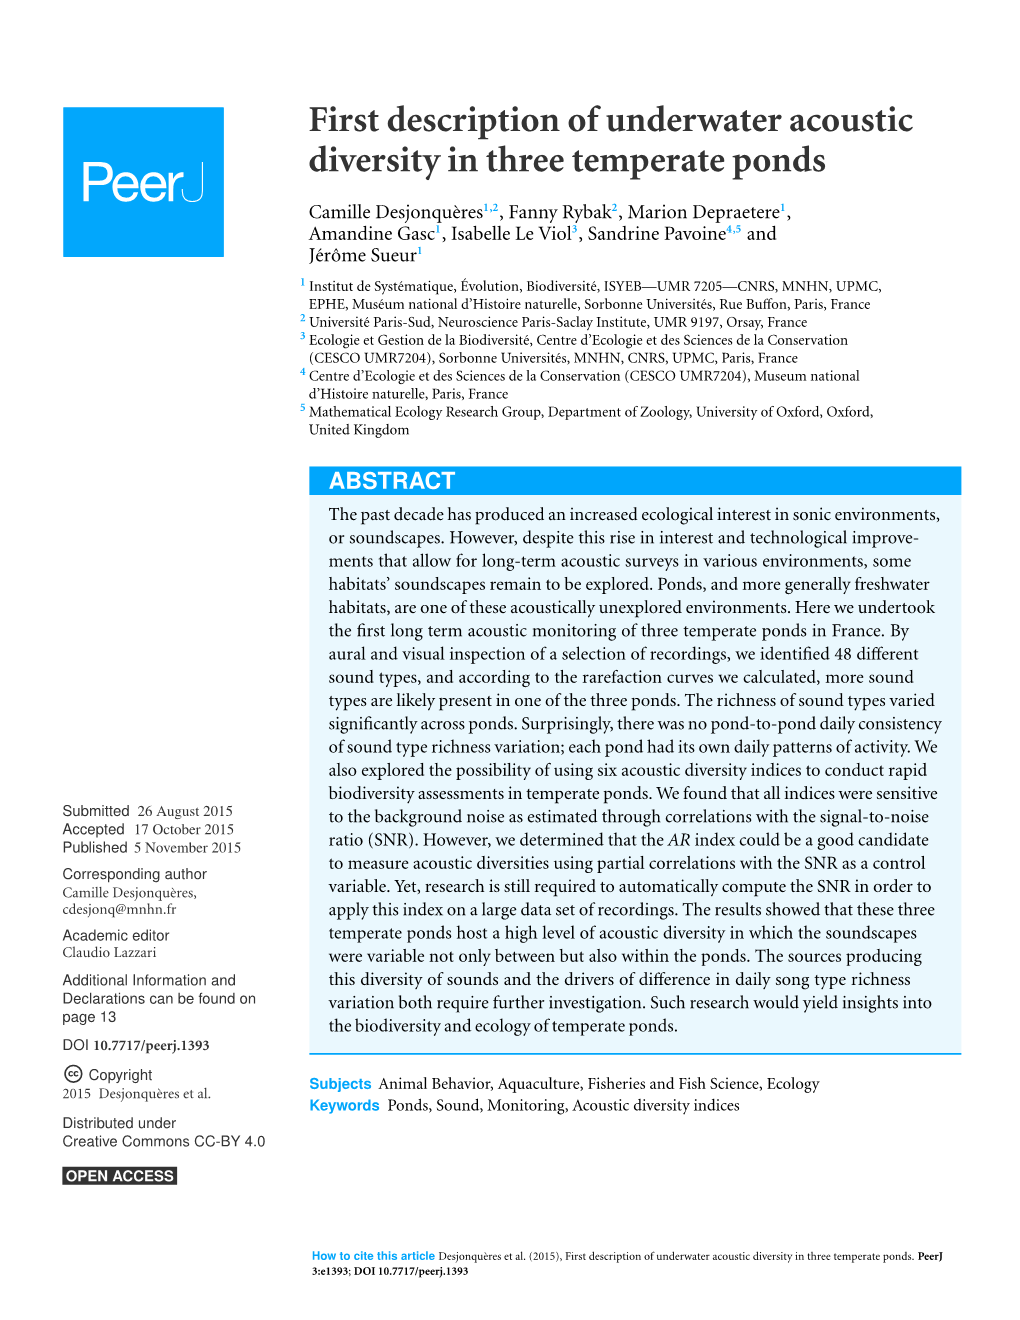 First Description of Underwater Acoustic Diversity in Three Temperate Ponds